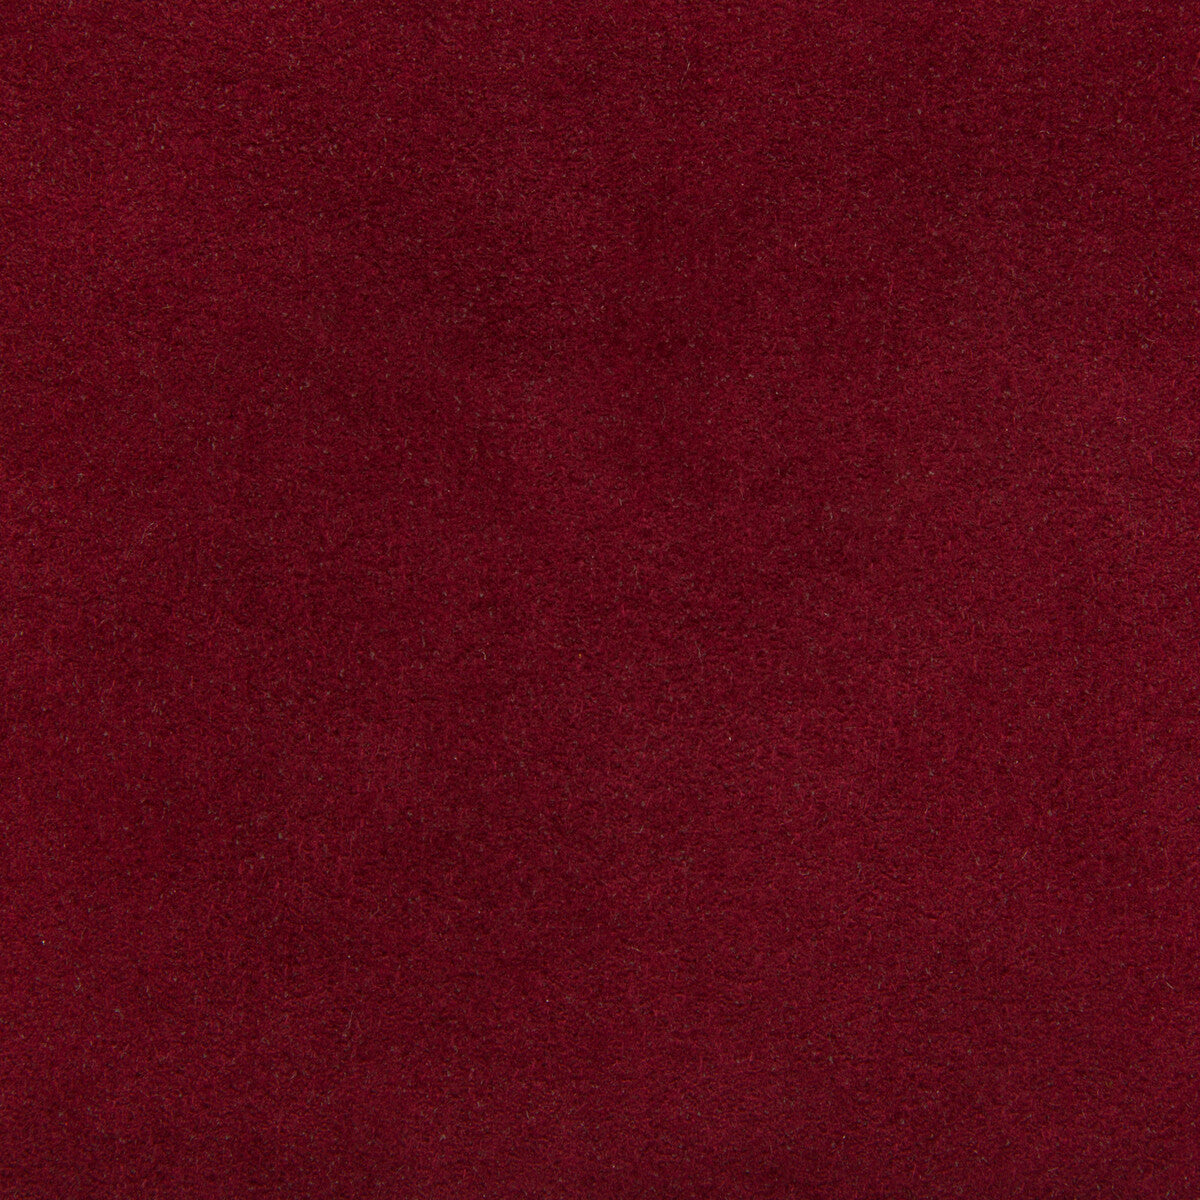 Ultrasuede fabric in berry color - pattern ULTRASUEDE.1240.0 - by Kravet Design in the Ultrasuede collection